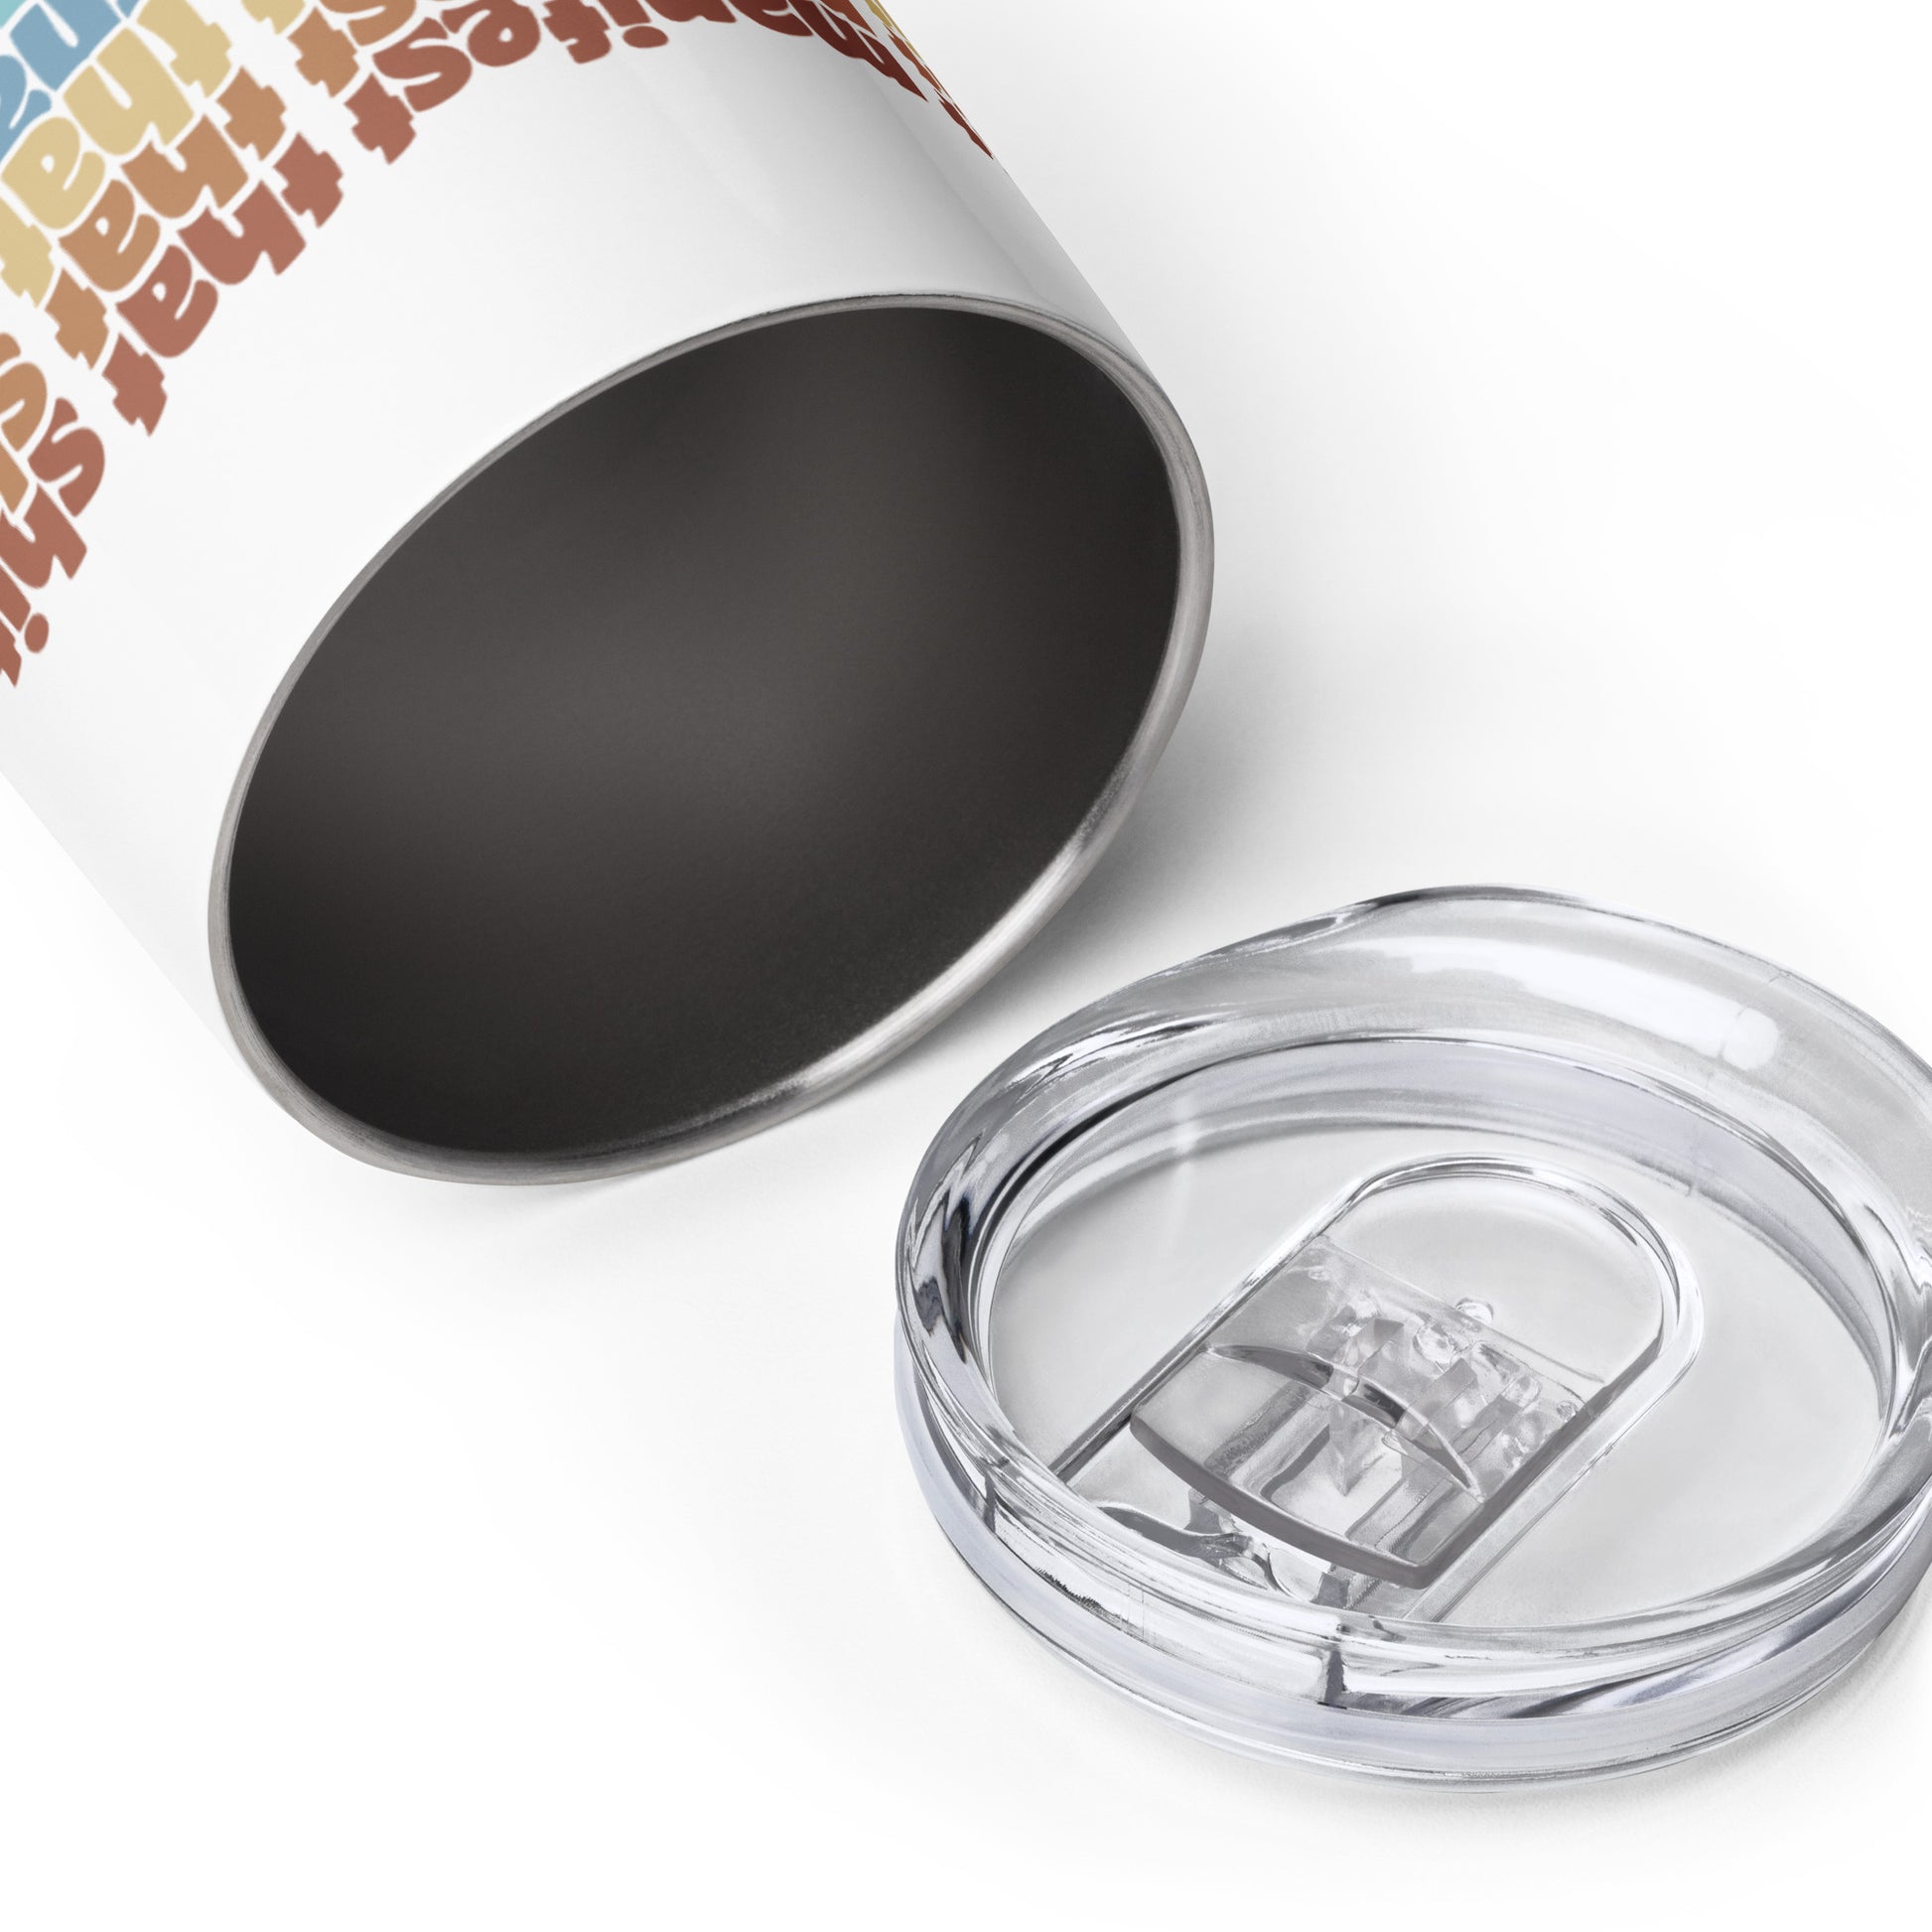 A close-up image of a wine tumbler, laying open on its side. The tumbler's plastic lid is laying next to the tumbler.